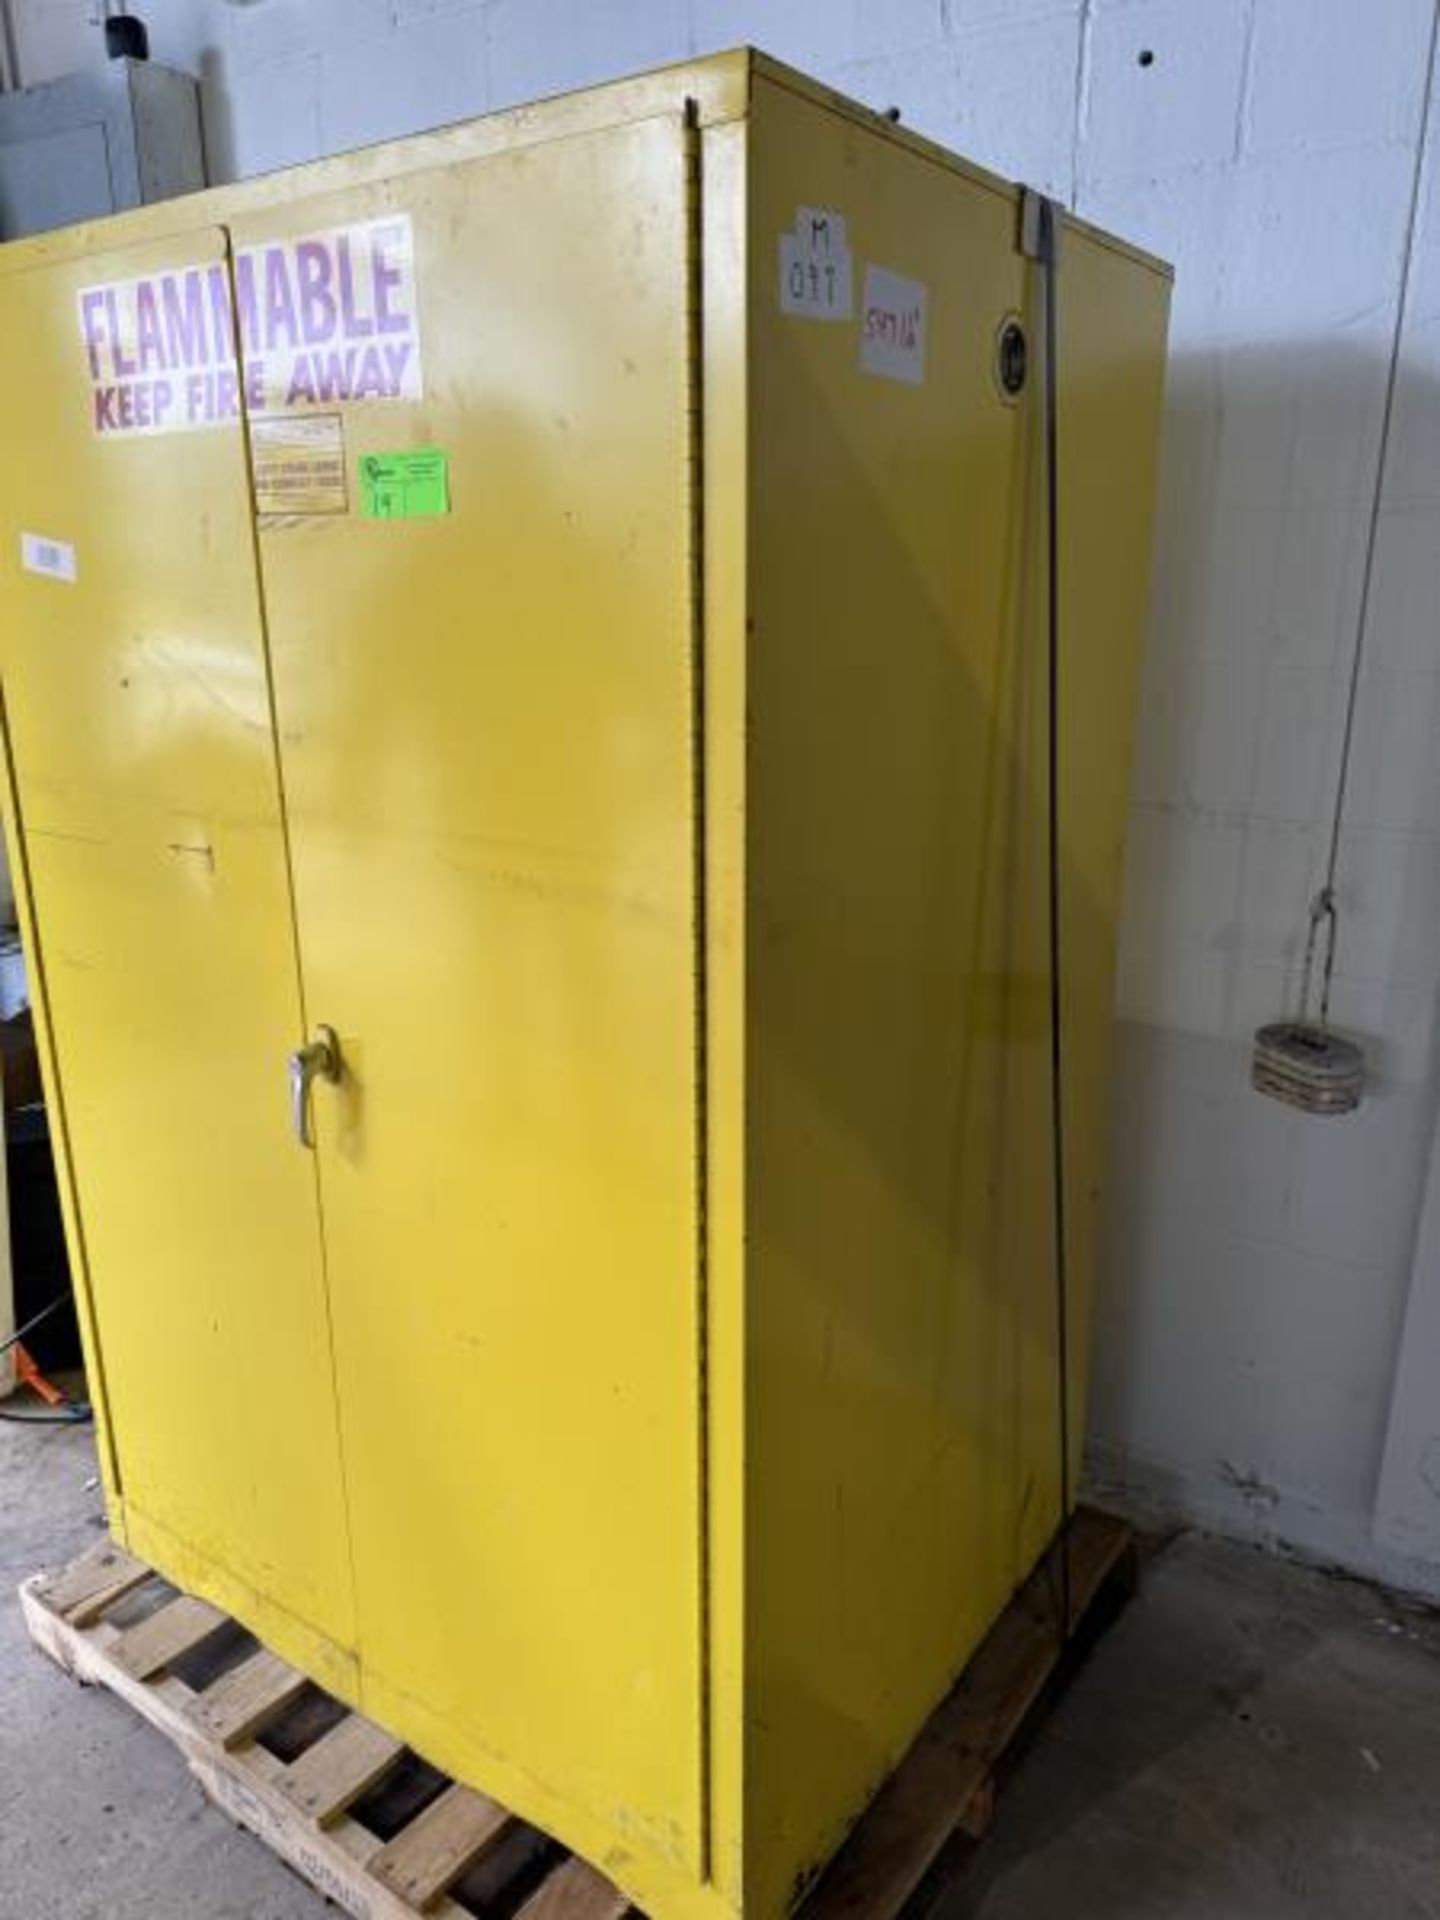 SE-CUR-AU Cabinet Safety Storage Cabinet Flammable Liquids 43" wide x 34" deep x 64" tall - Image 2 of 4